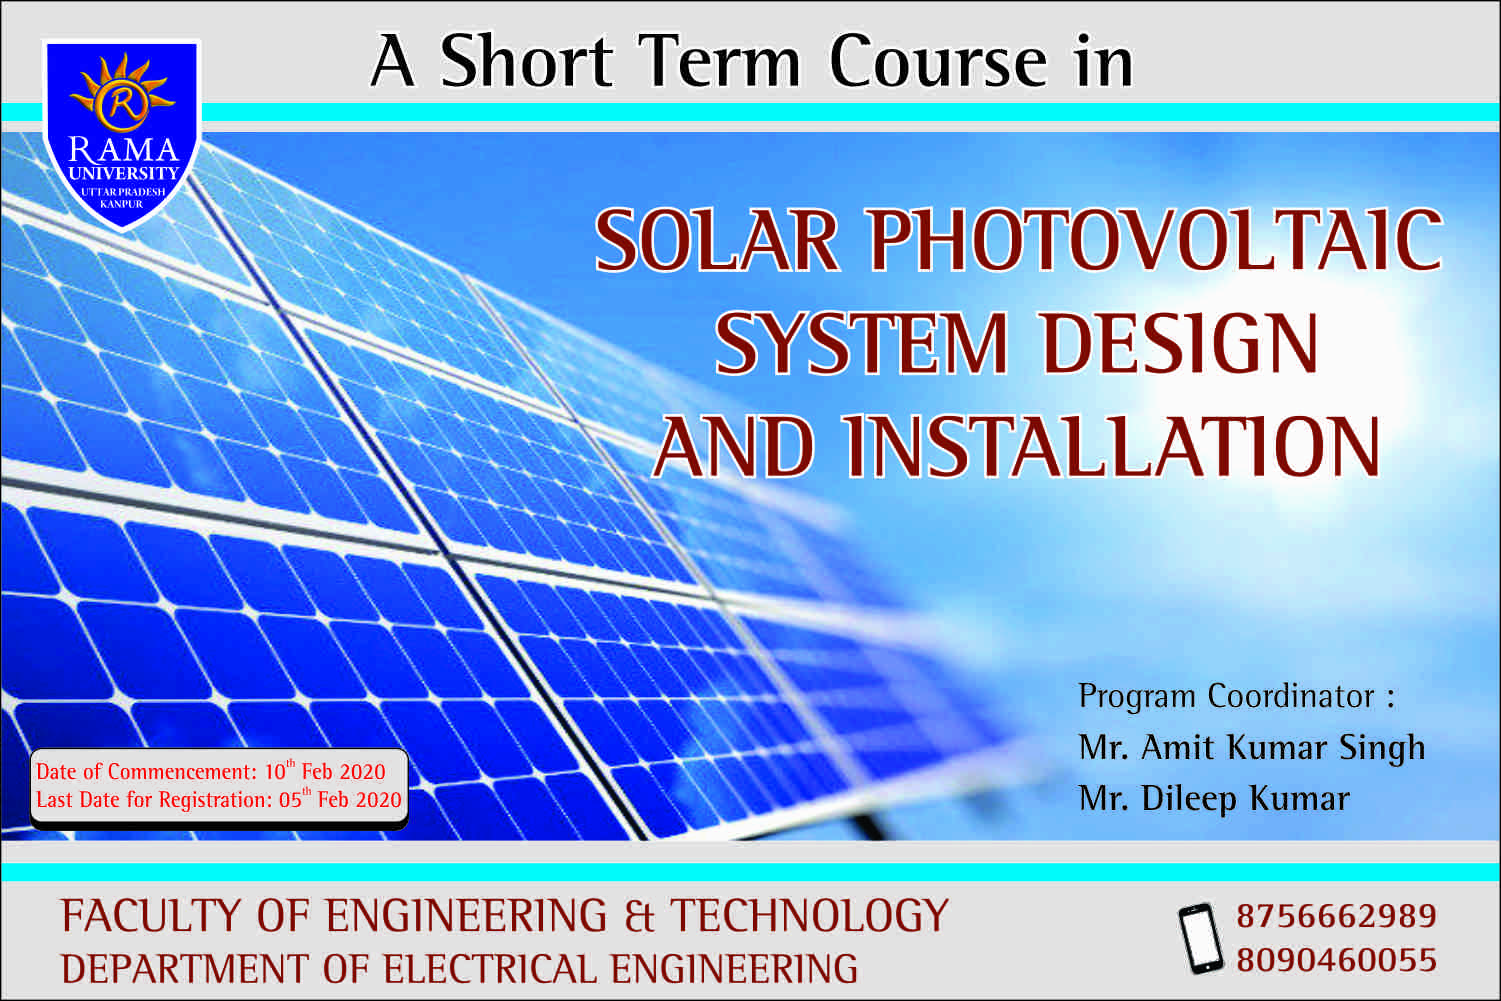 Solar Photovoltaic System Design and Installation